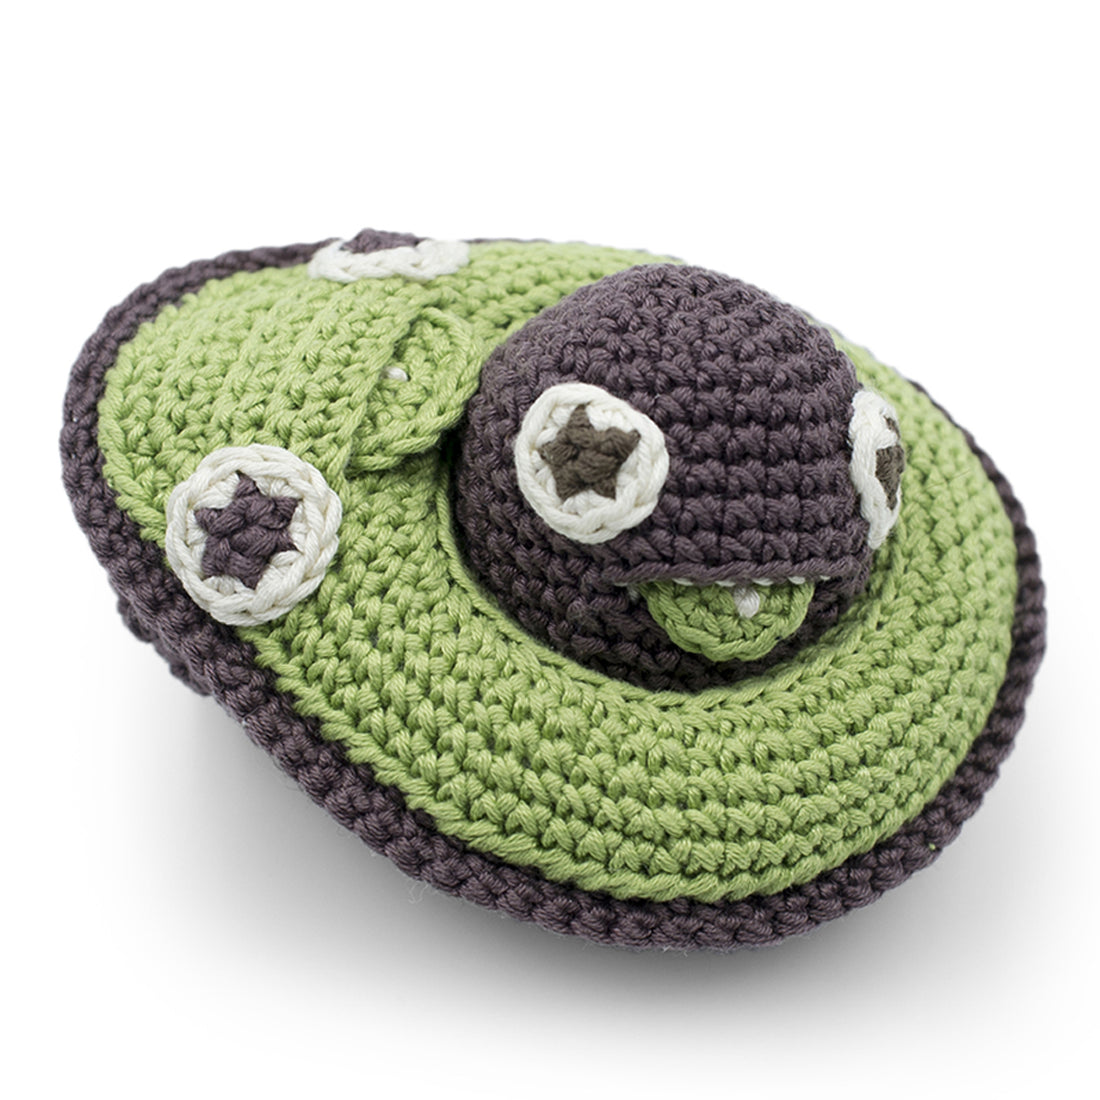 myum-mommy-avocado-and-her-baby-stone-rattle- (1)